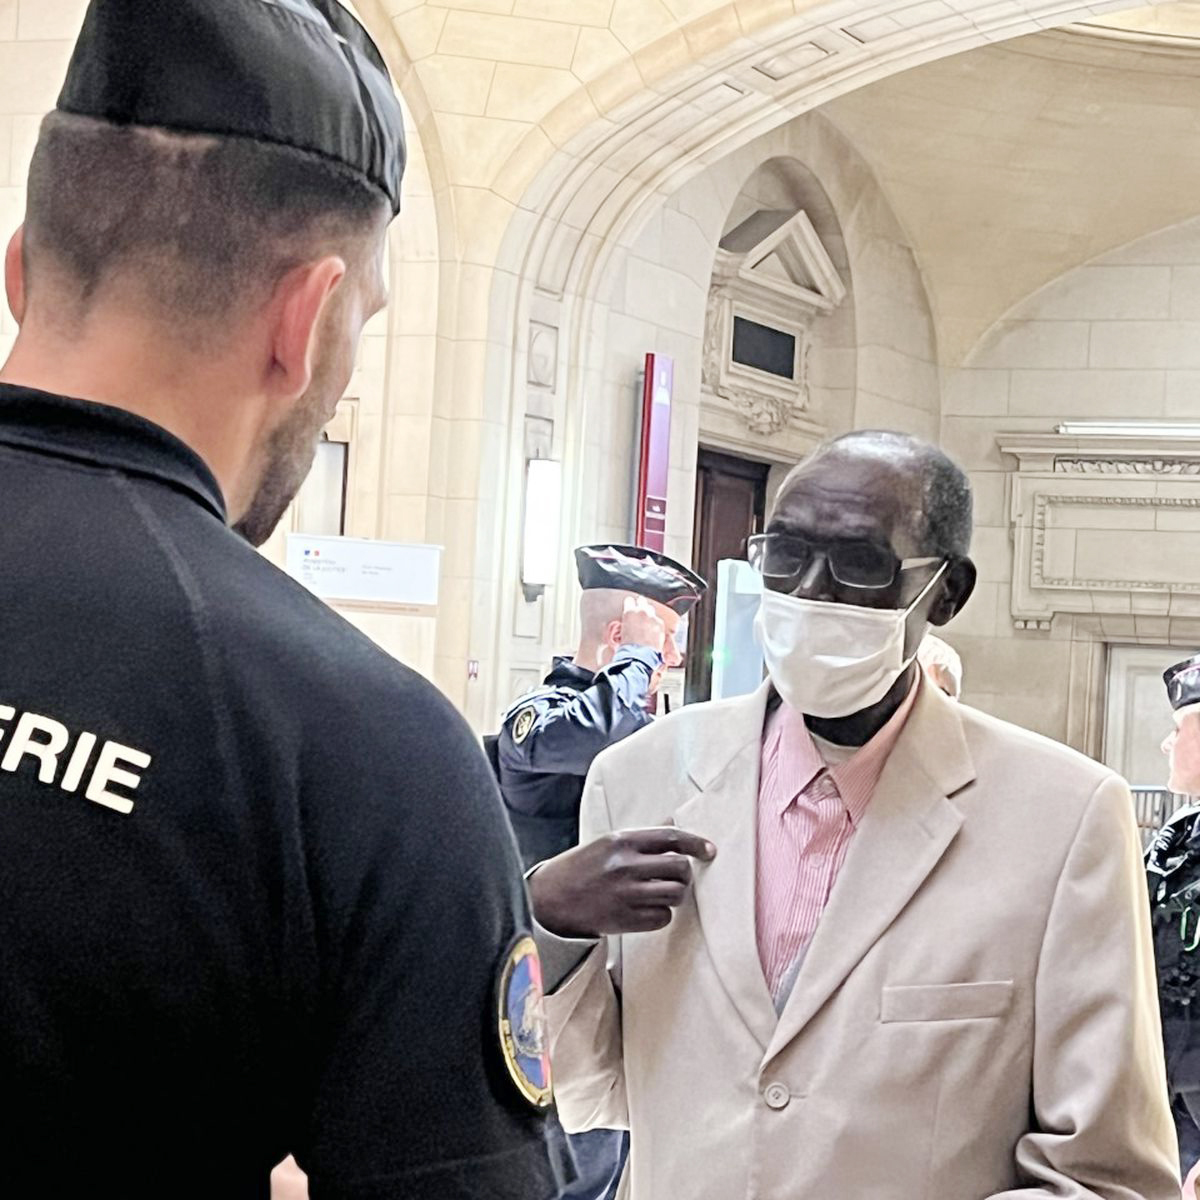 Former Gikongoro prefet Laurent Bucyibaruta was sentenced to 20 years in prison for his role in the 1994 Genocide against the Tutsi. Photo: Courtesy.